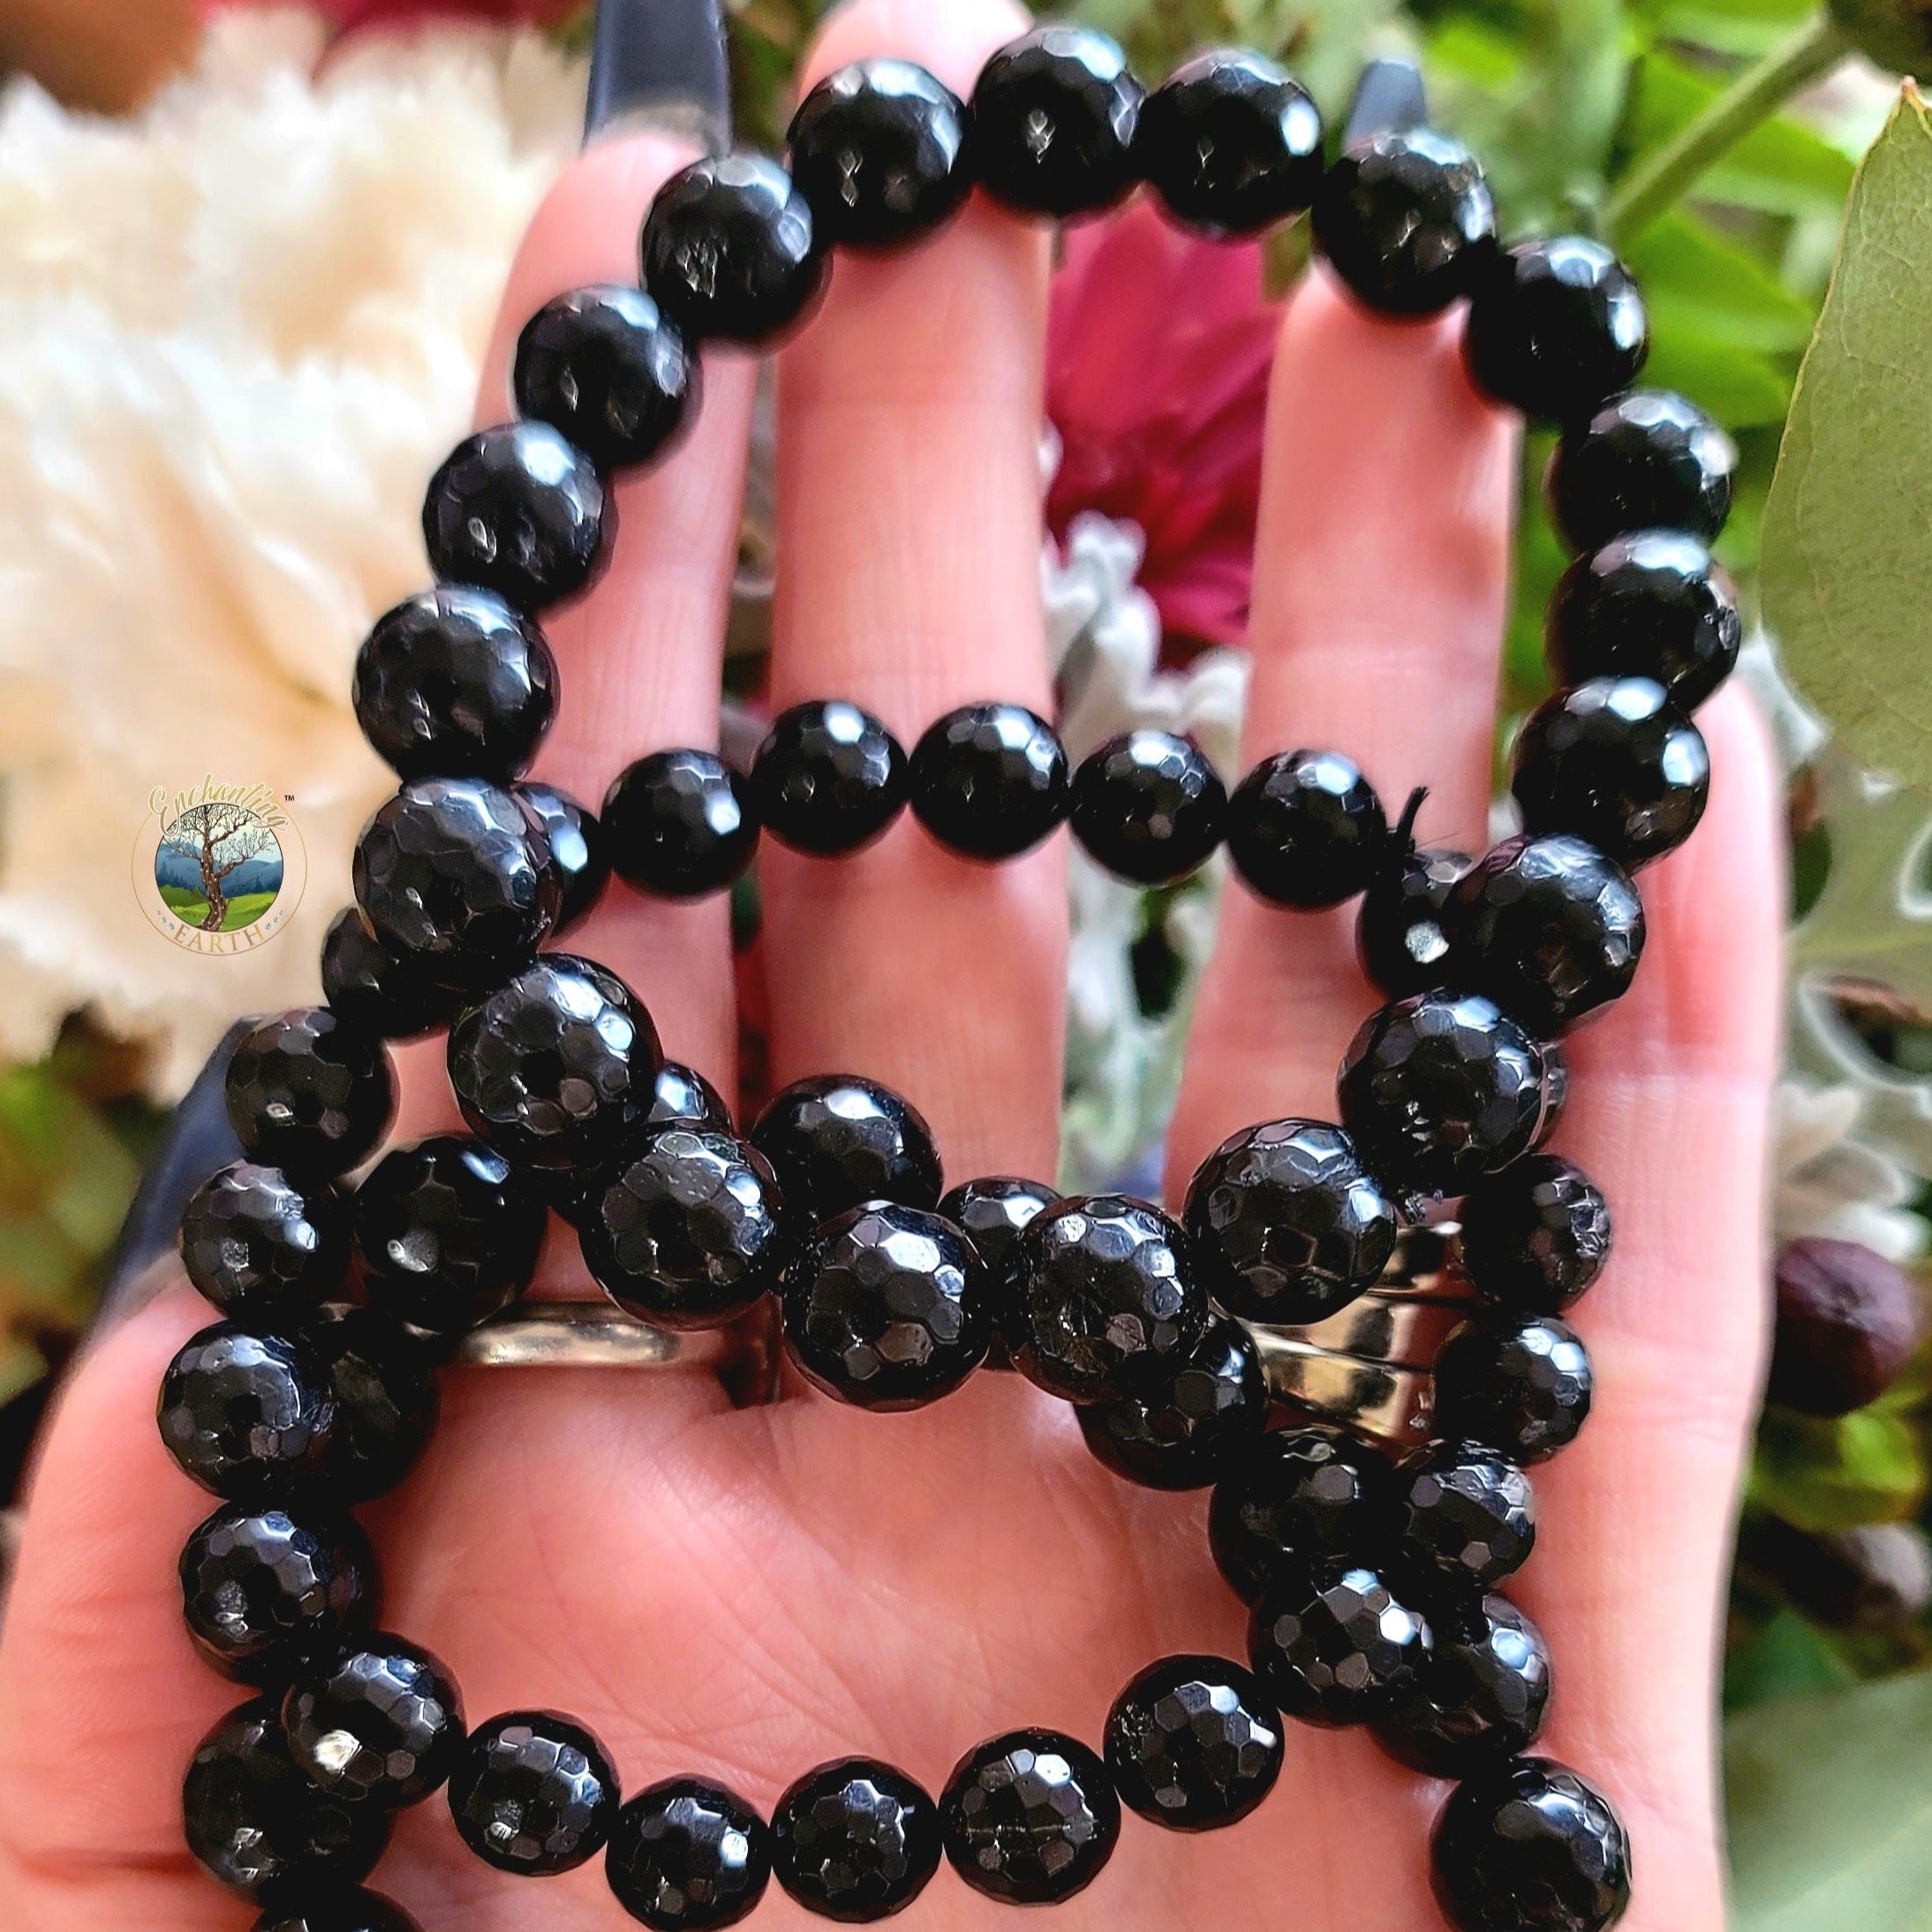 Black Tourmaline Faceted Bracelet for Protection and Purification